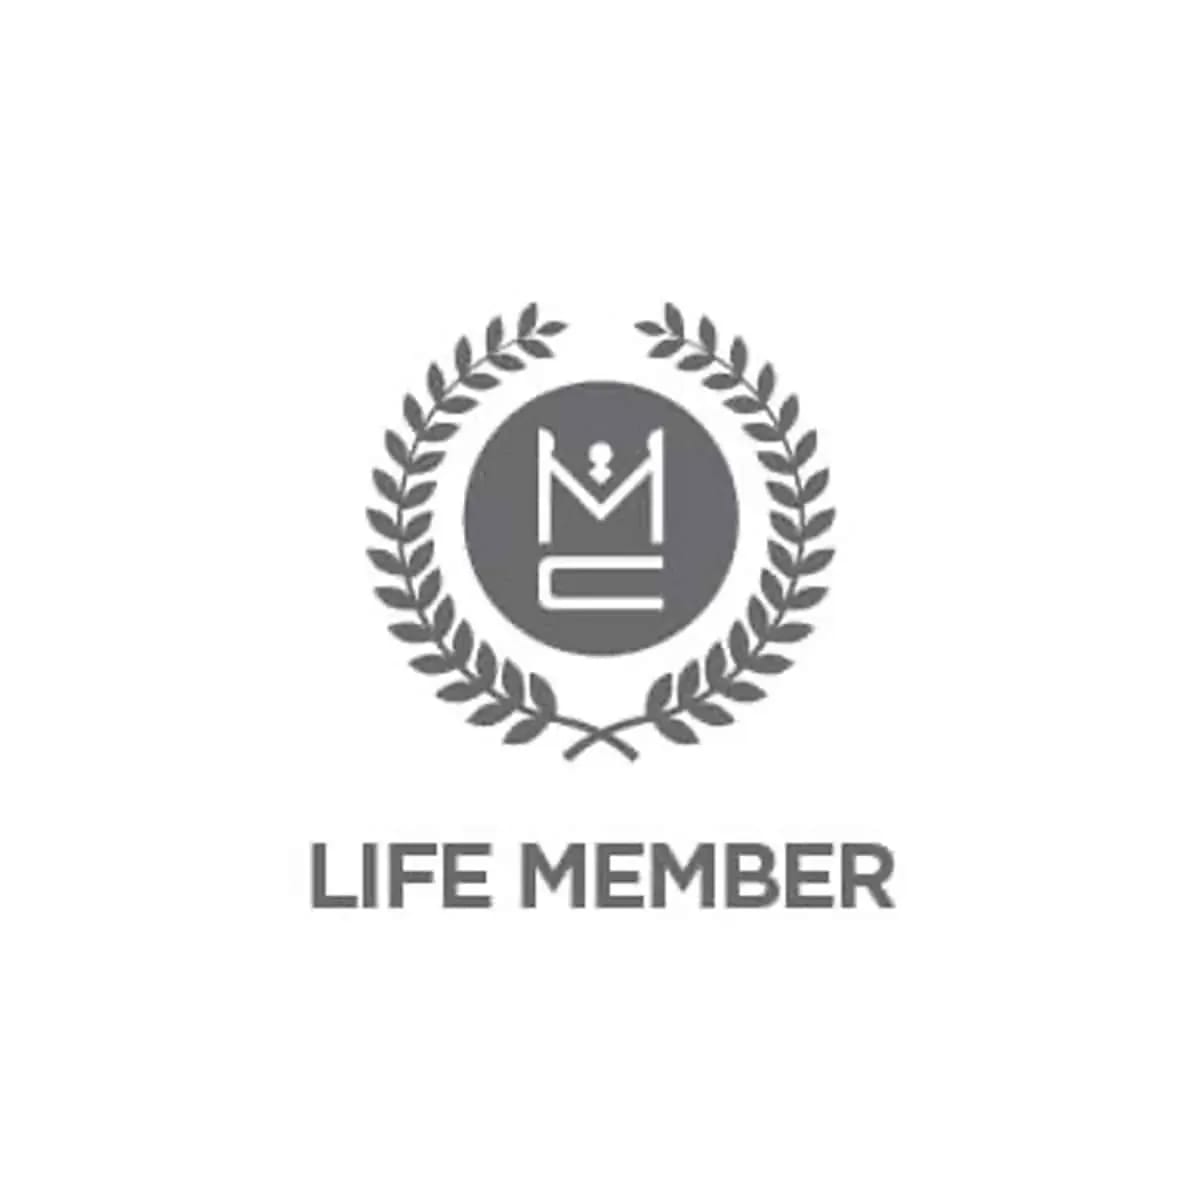 A life member logo with the crown and wreath.